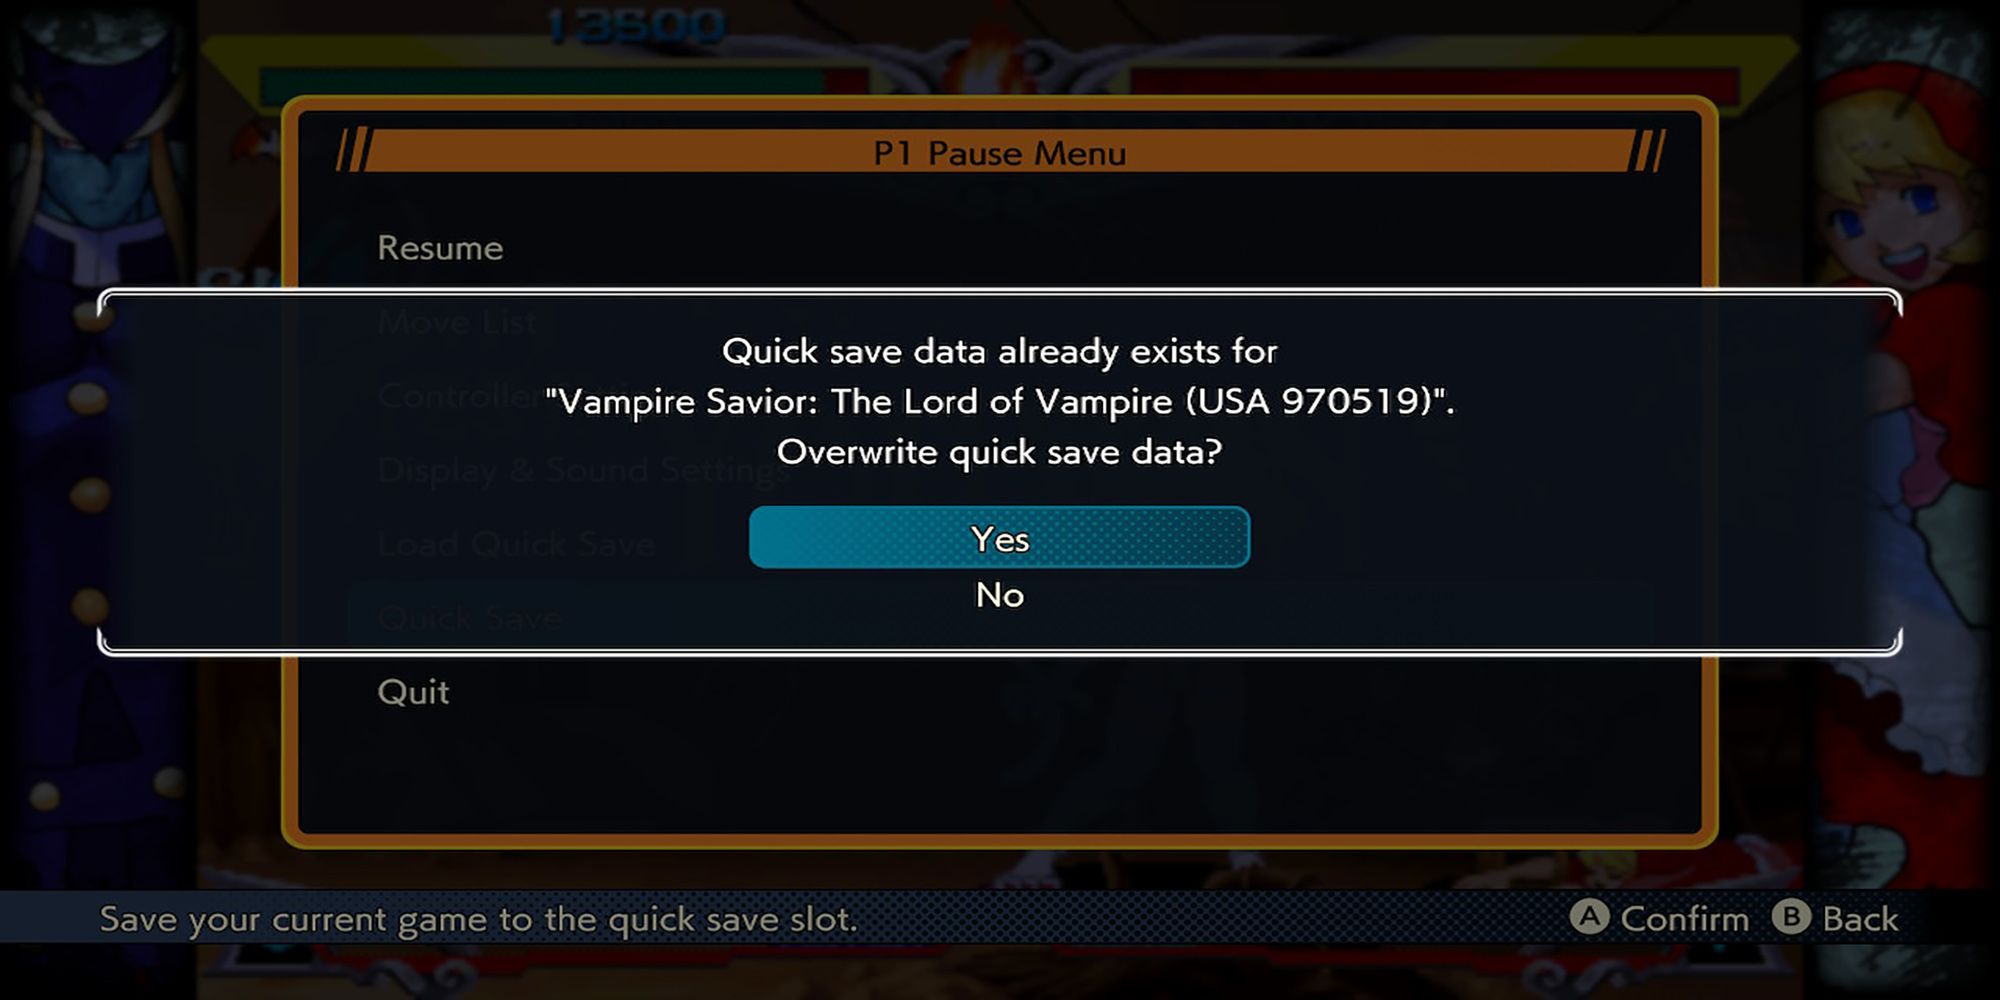 Capcom Fighting Collection asks the player if they wish to overwrite their Vampire Savior quick save data.